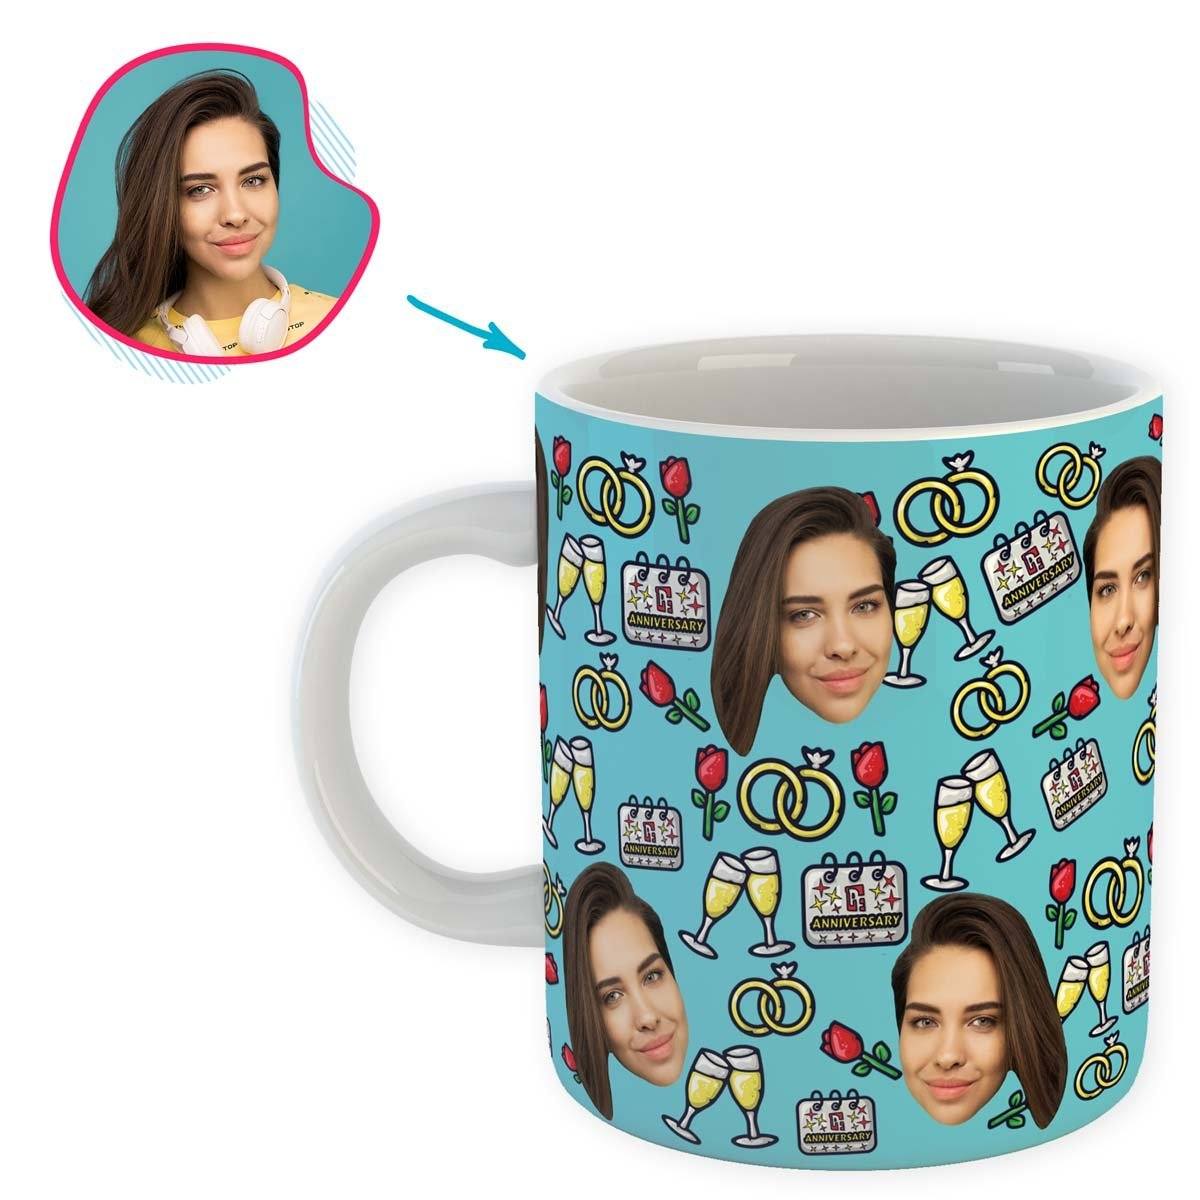 Blue Anniversary personalized mug with photo of face printed on it